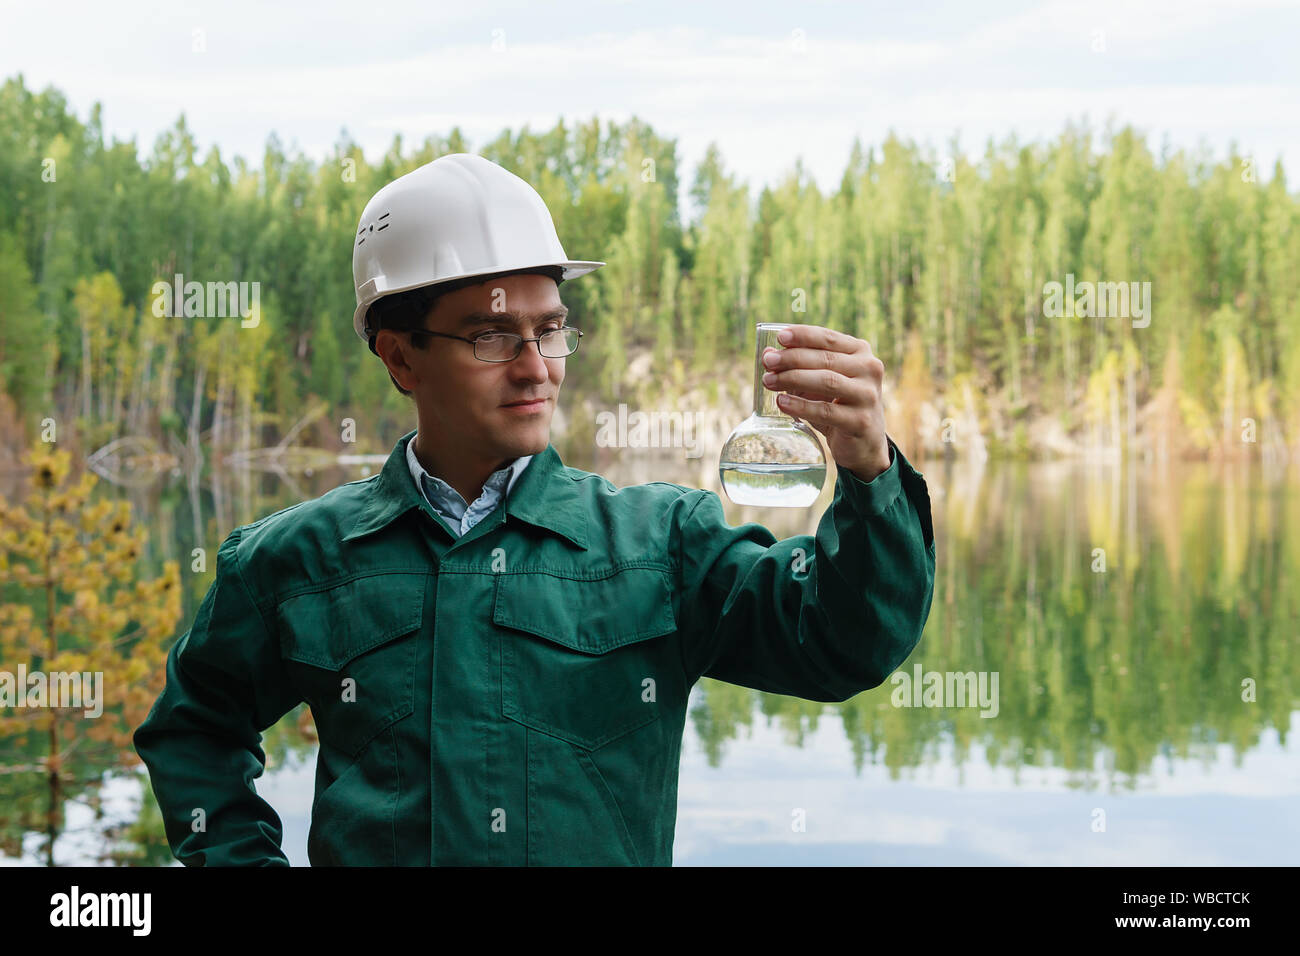 industrial ecologist or hydrologist visually evaluates the response of a water sample from lake at the site of a flooded mining pit Stock Photo